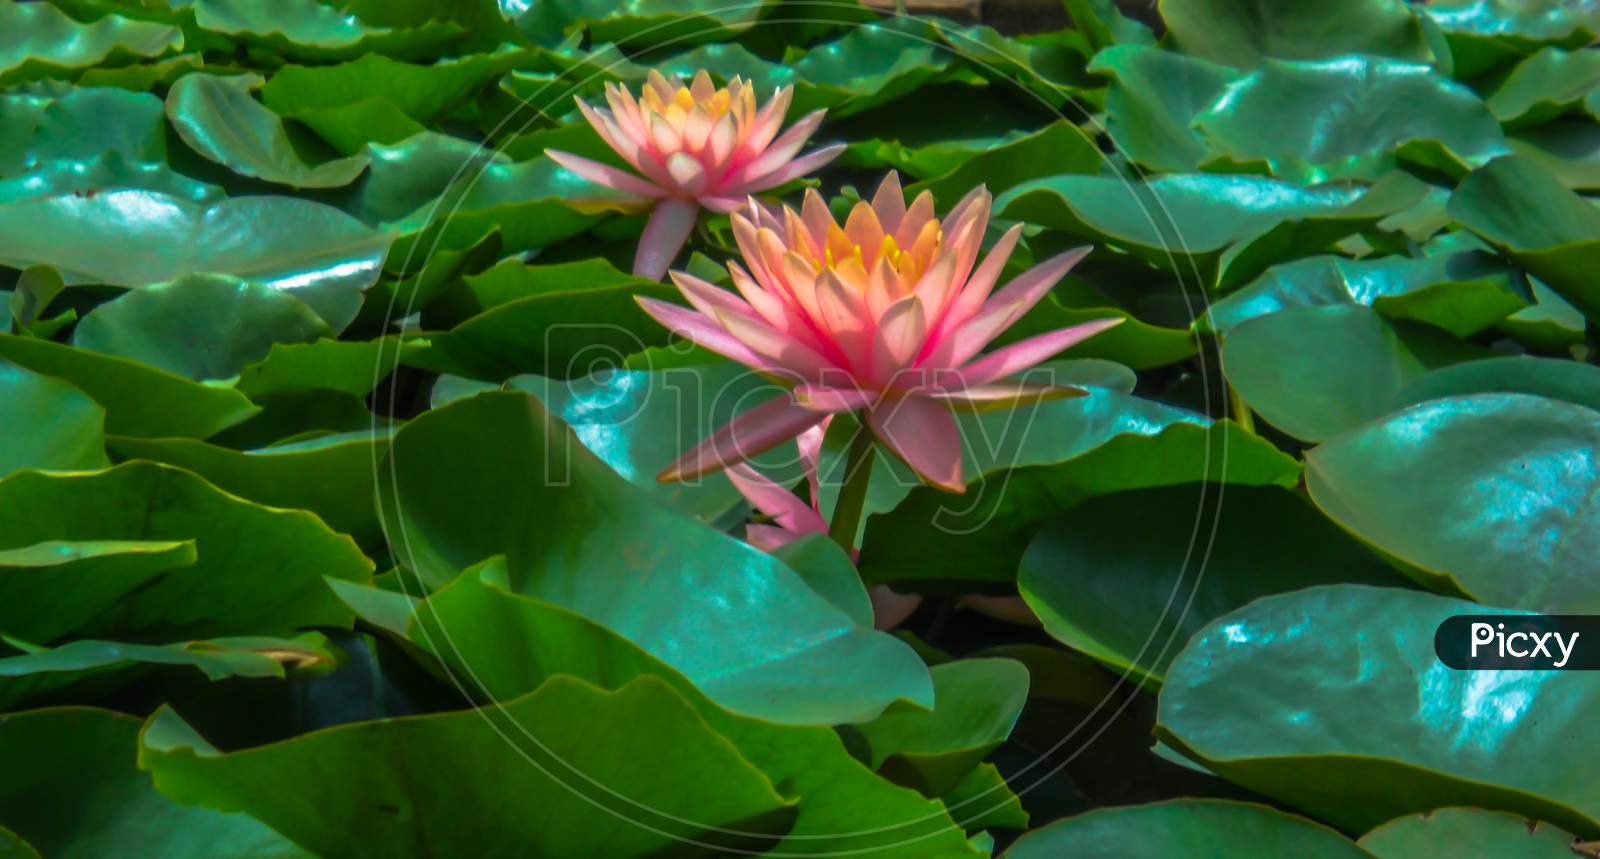 Two Pink Lotus Flowers In A Pond Surrounded By The Green Leaves